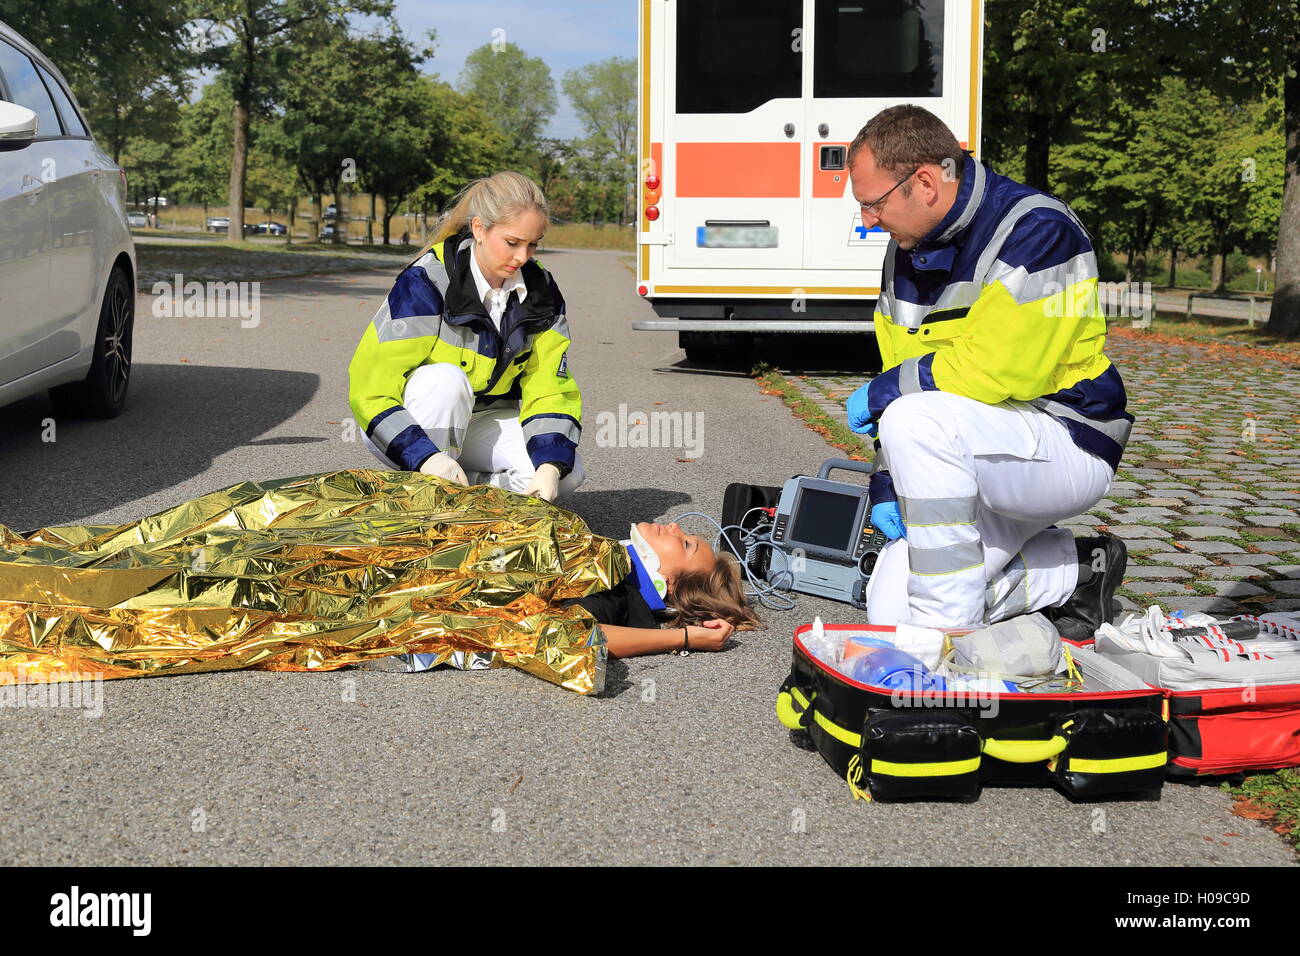 Two paramedics helping a woman after a traffic accident Stock Photo